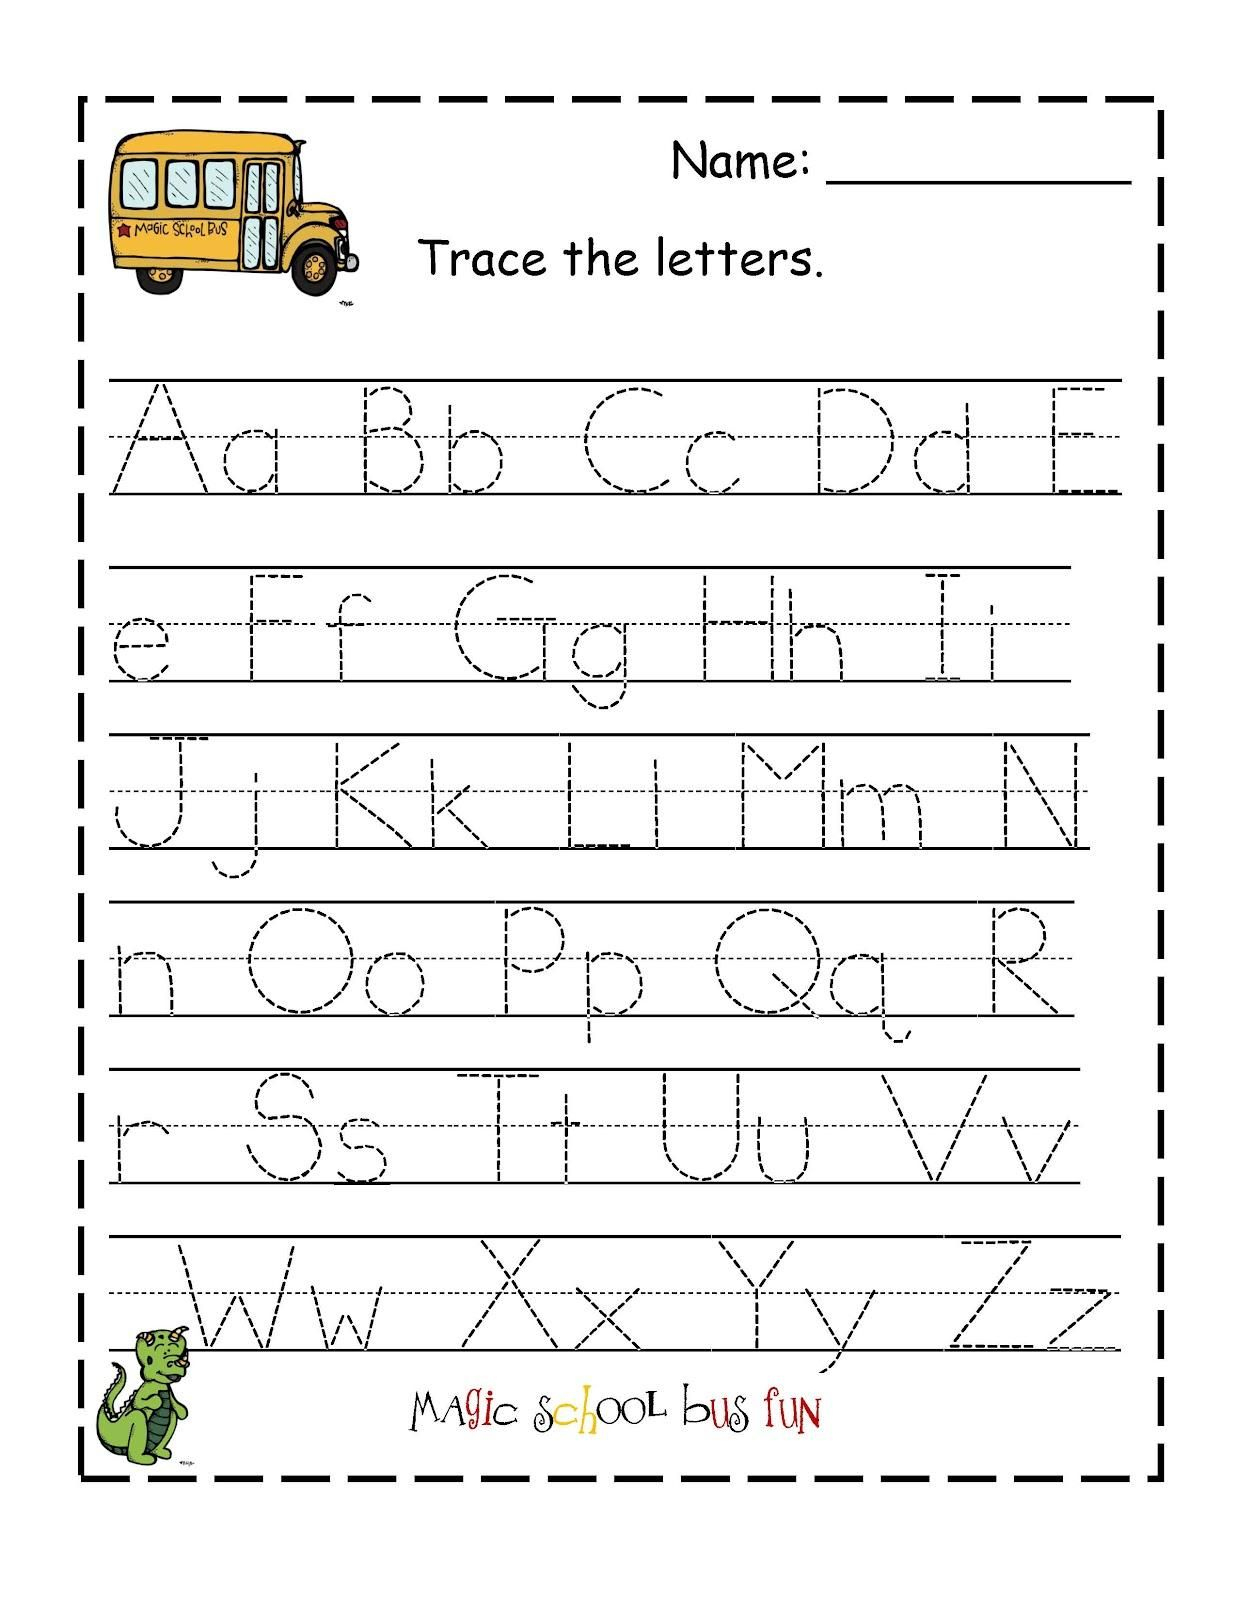 Free Printable Abc Tracing Worksheets #2 | Places To Visit - Free Printable Traceable Letters